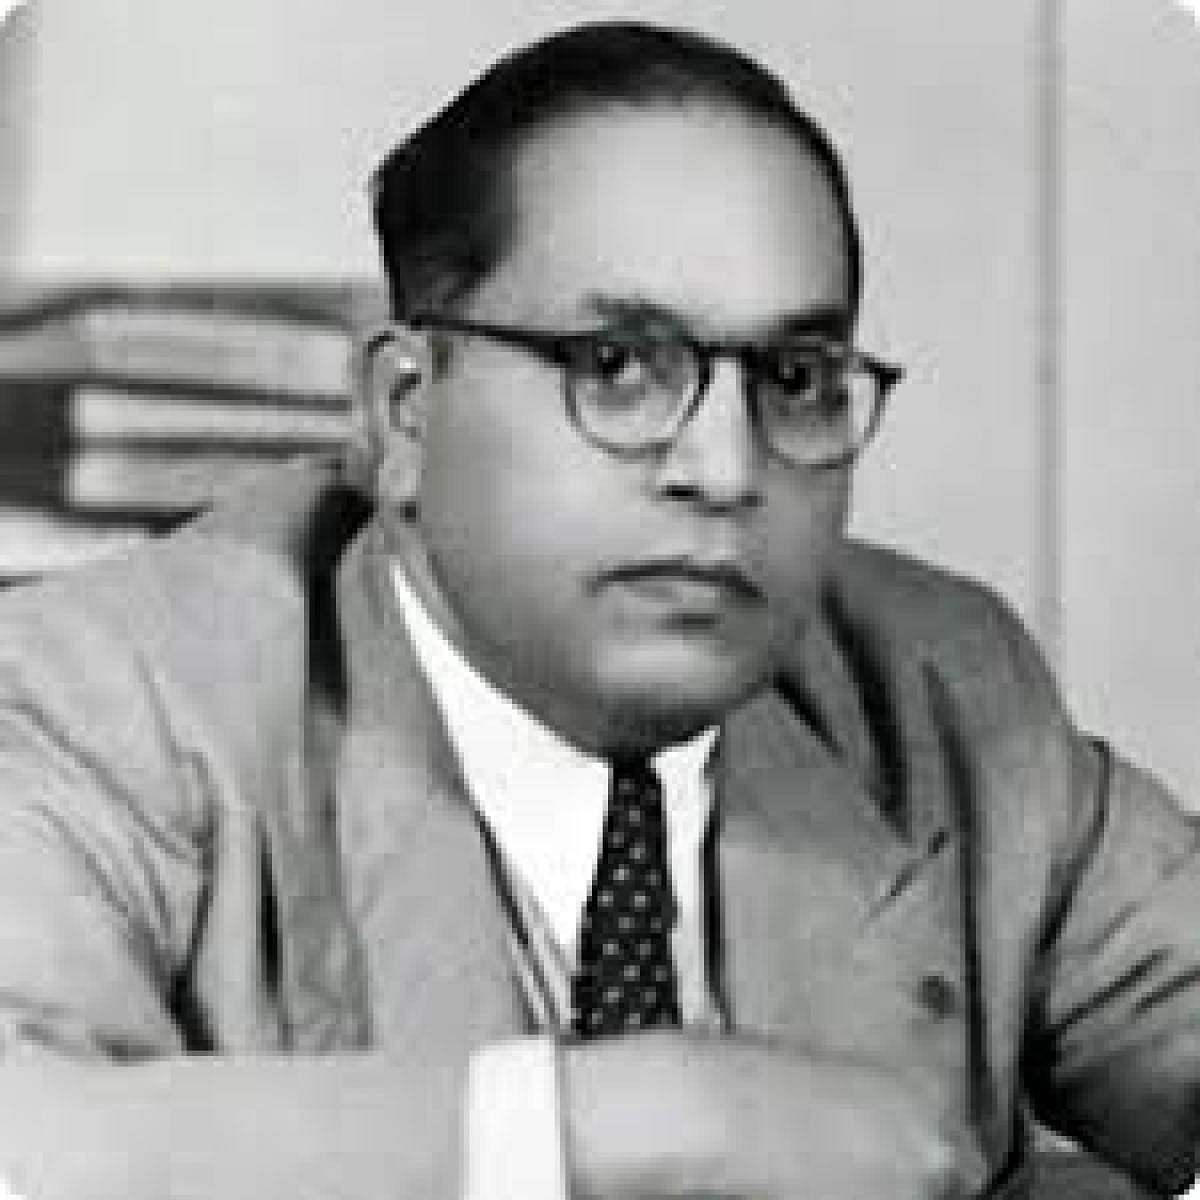 B R Ambedkar in a speech to the Constituent Assembly on November 25, 1949